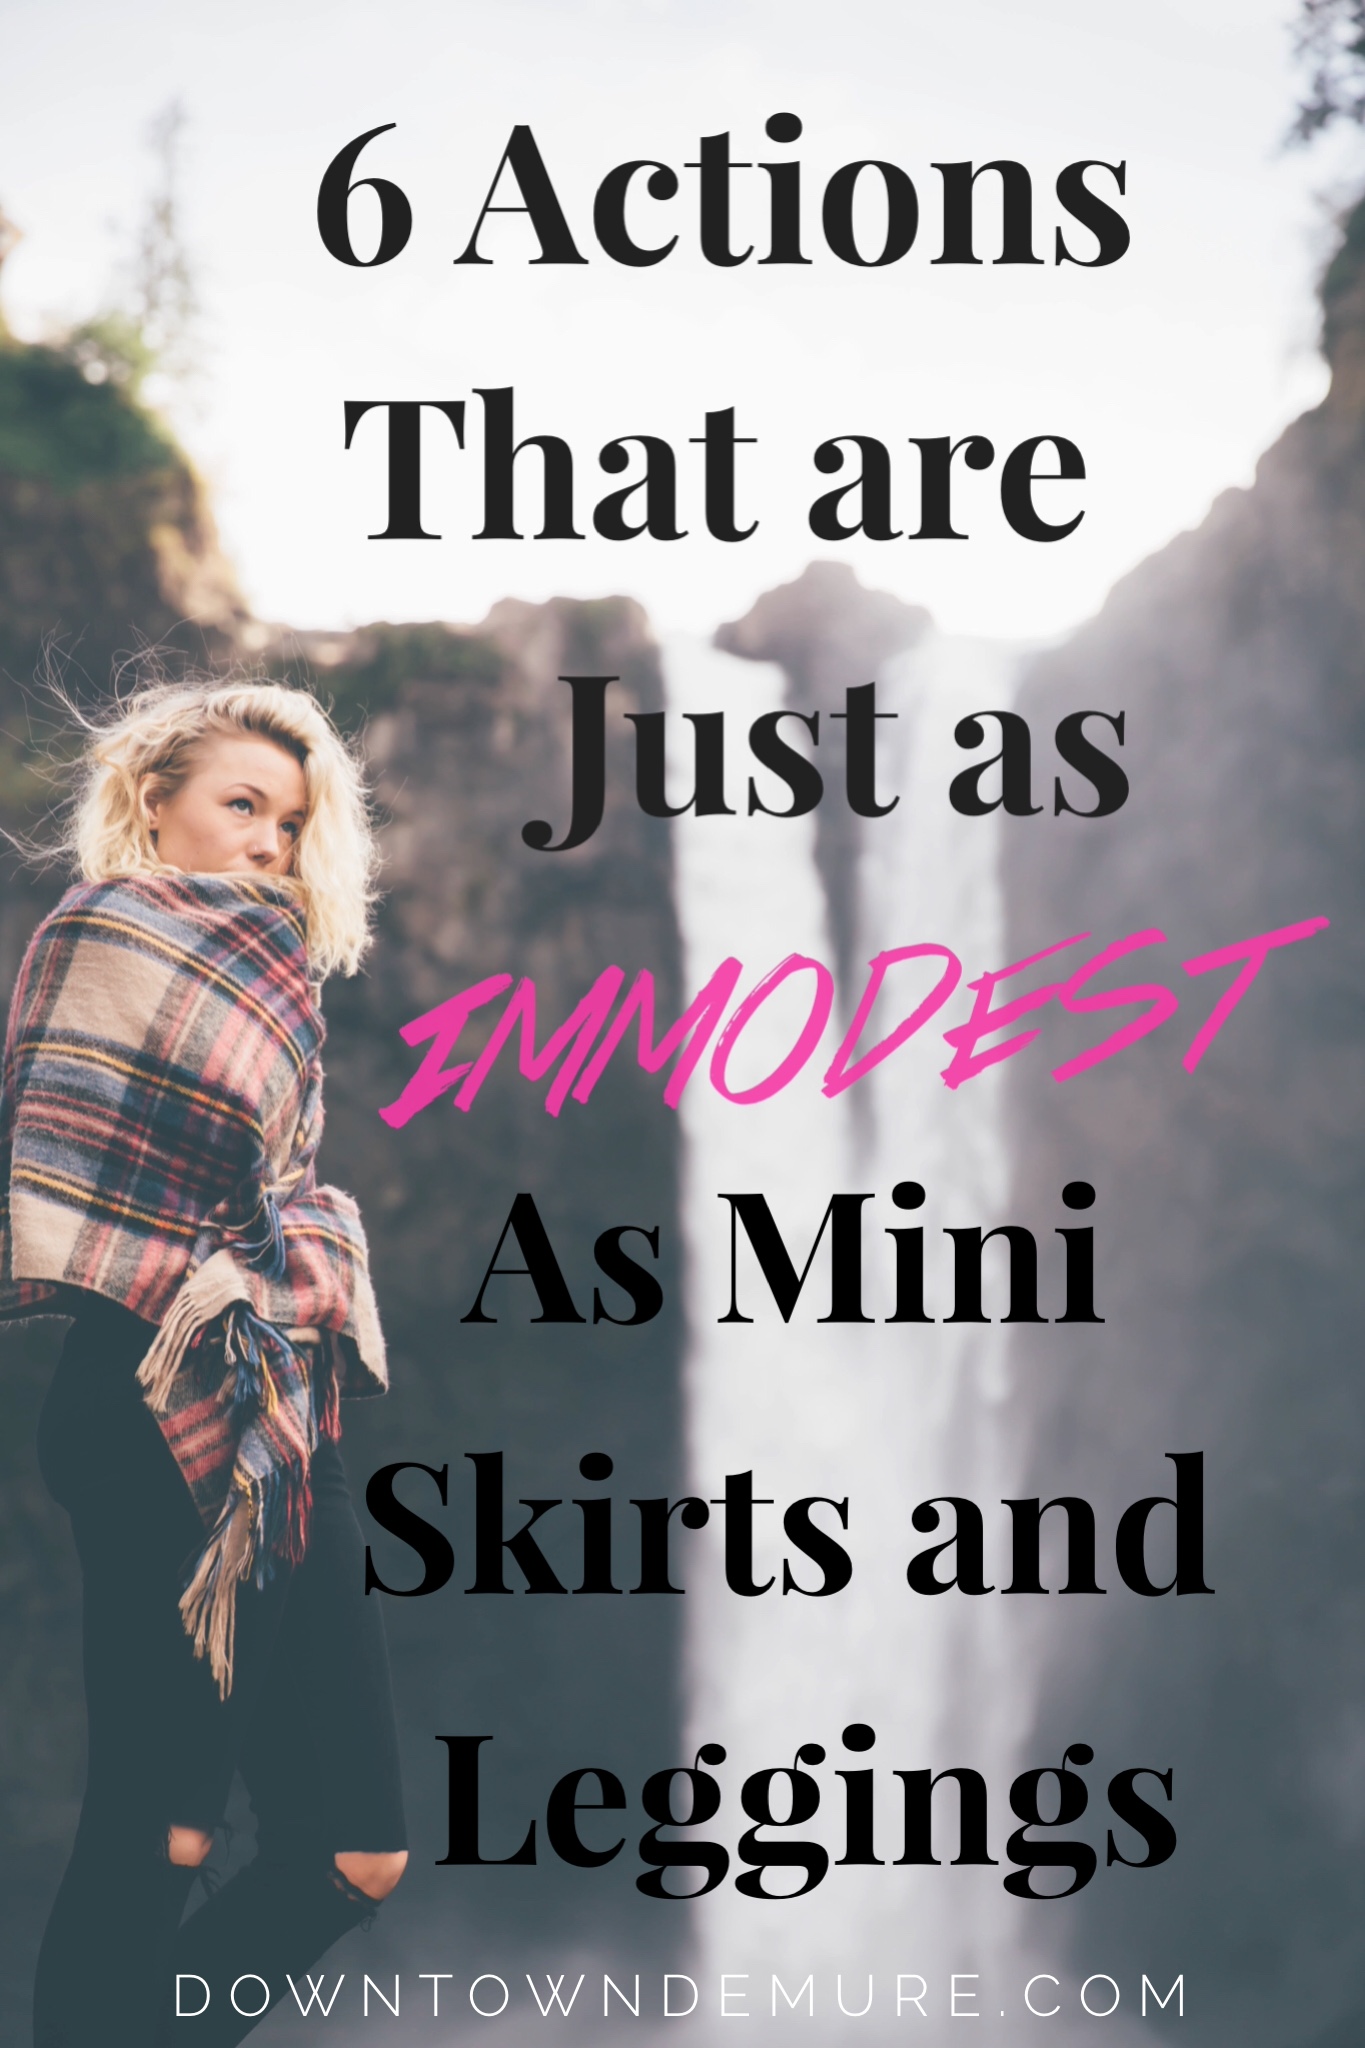 6 Actions That Are Just As Immodest As Mini Skirts and Leggings - Dowtown Demure